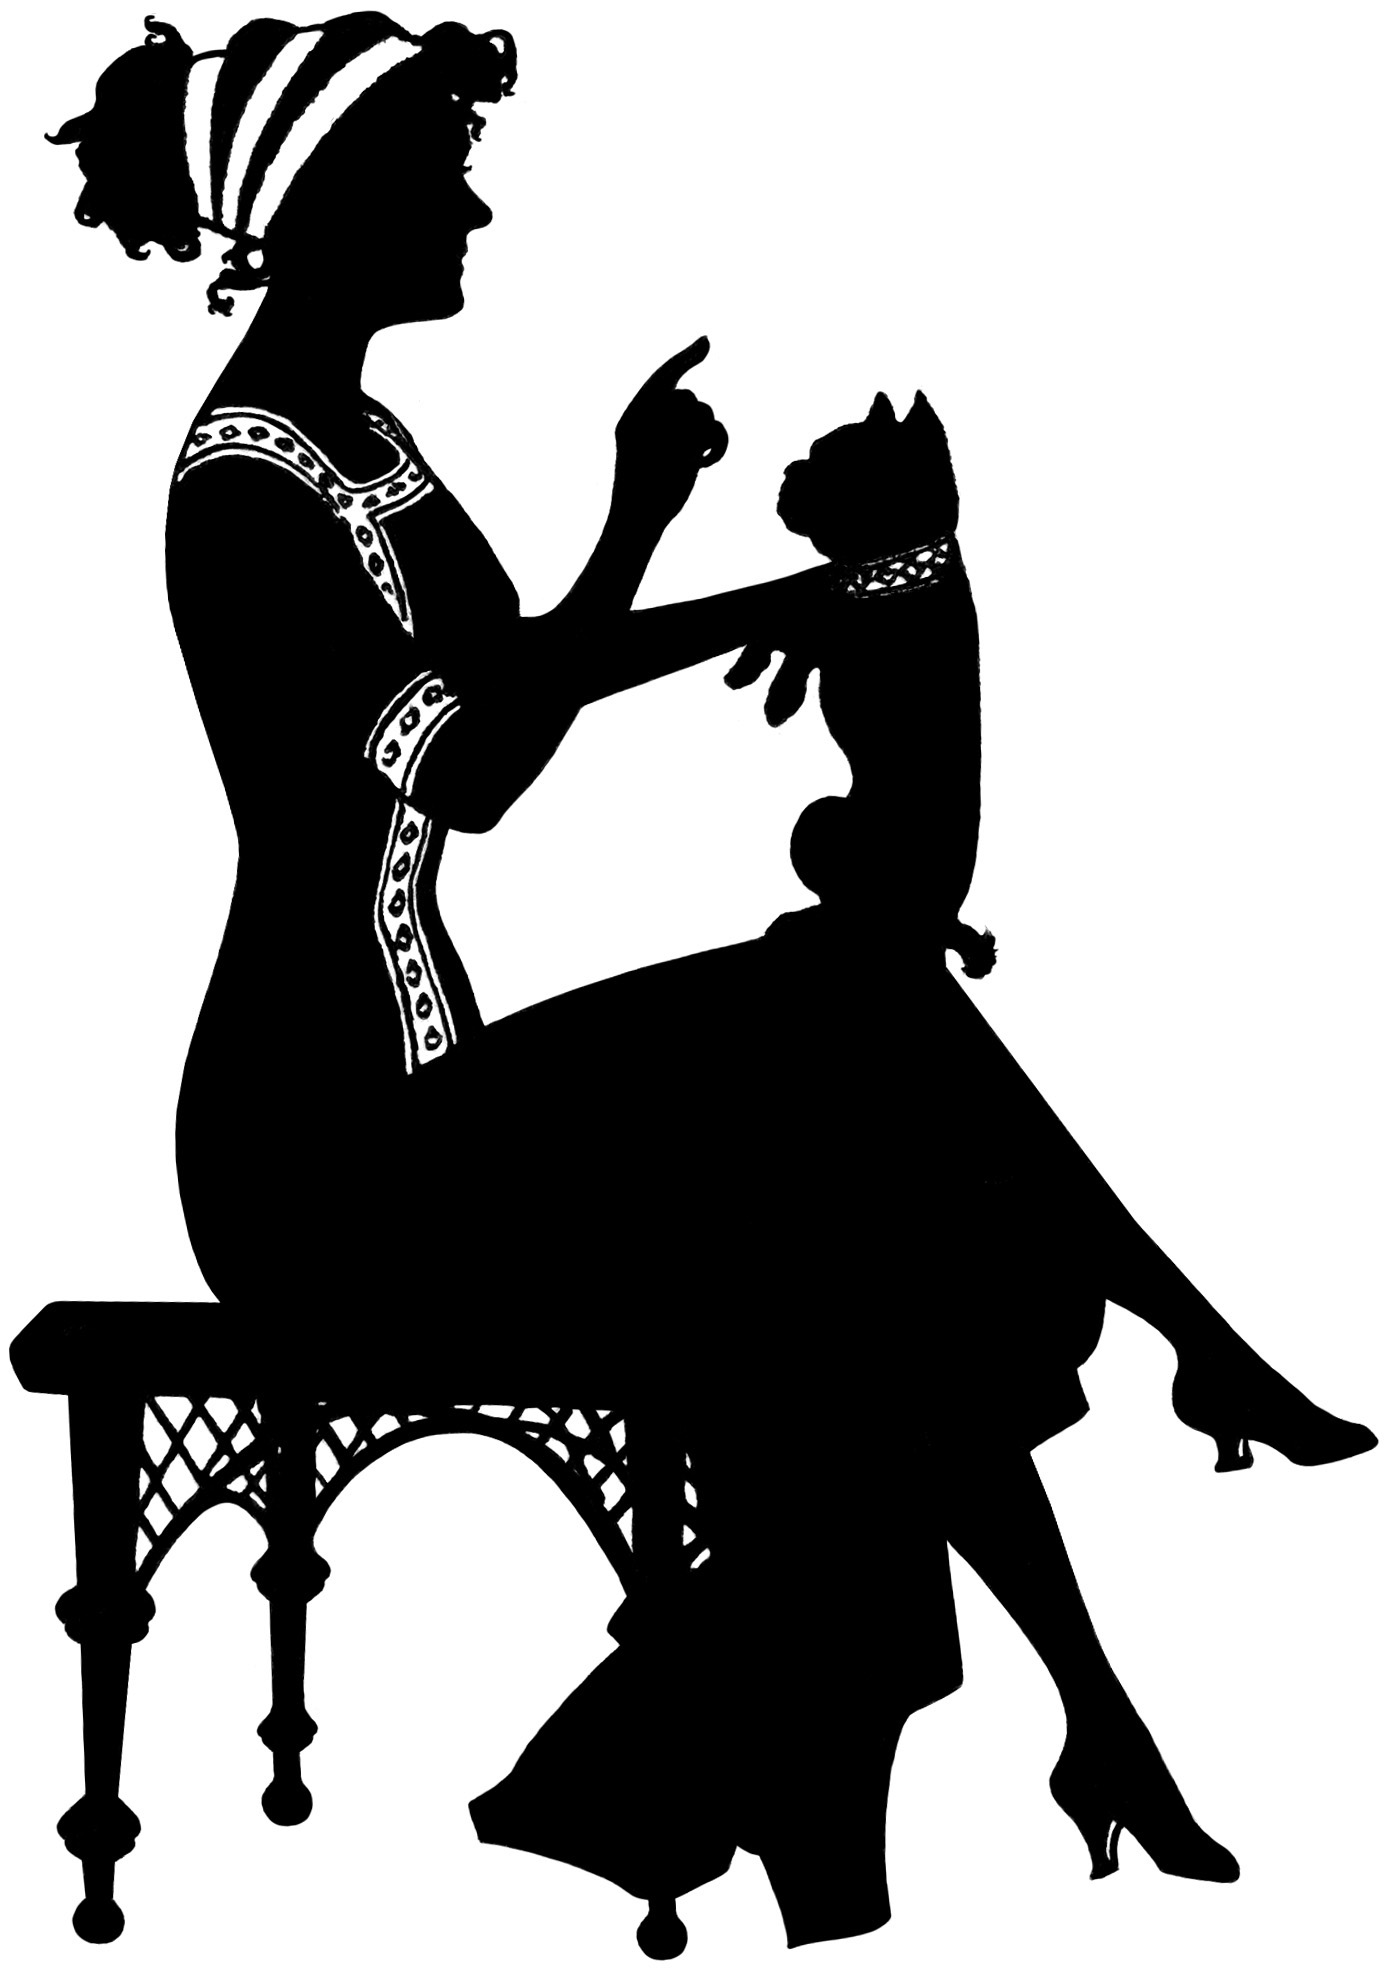 Free Vintage Image ~ Silhouette of Lady - The Old Design Shop